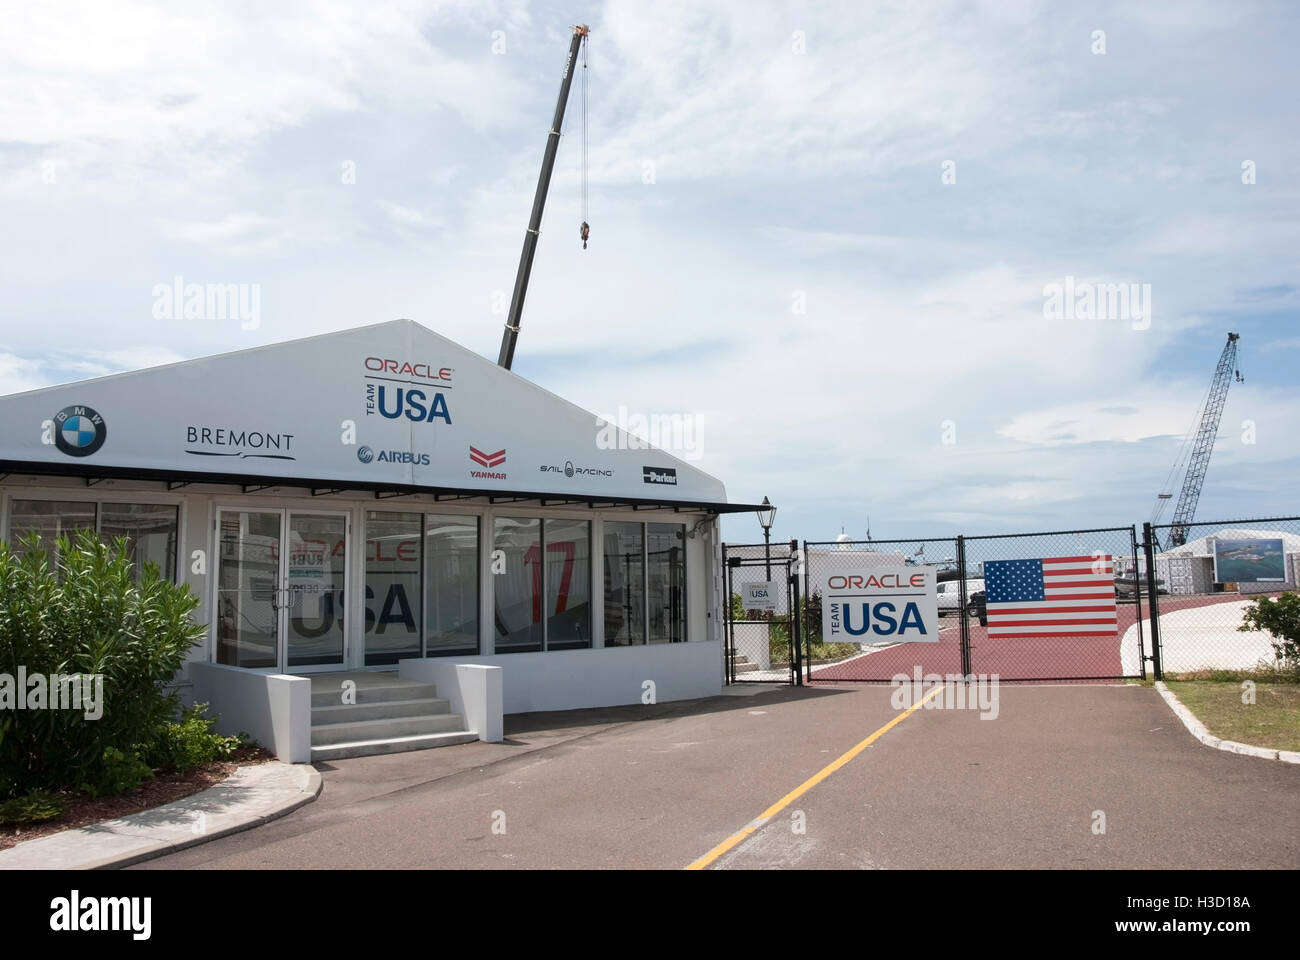 Gateway to Americas Cup Oracle Team USA Bermuda Compound Stock Photo